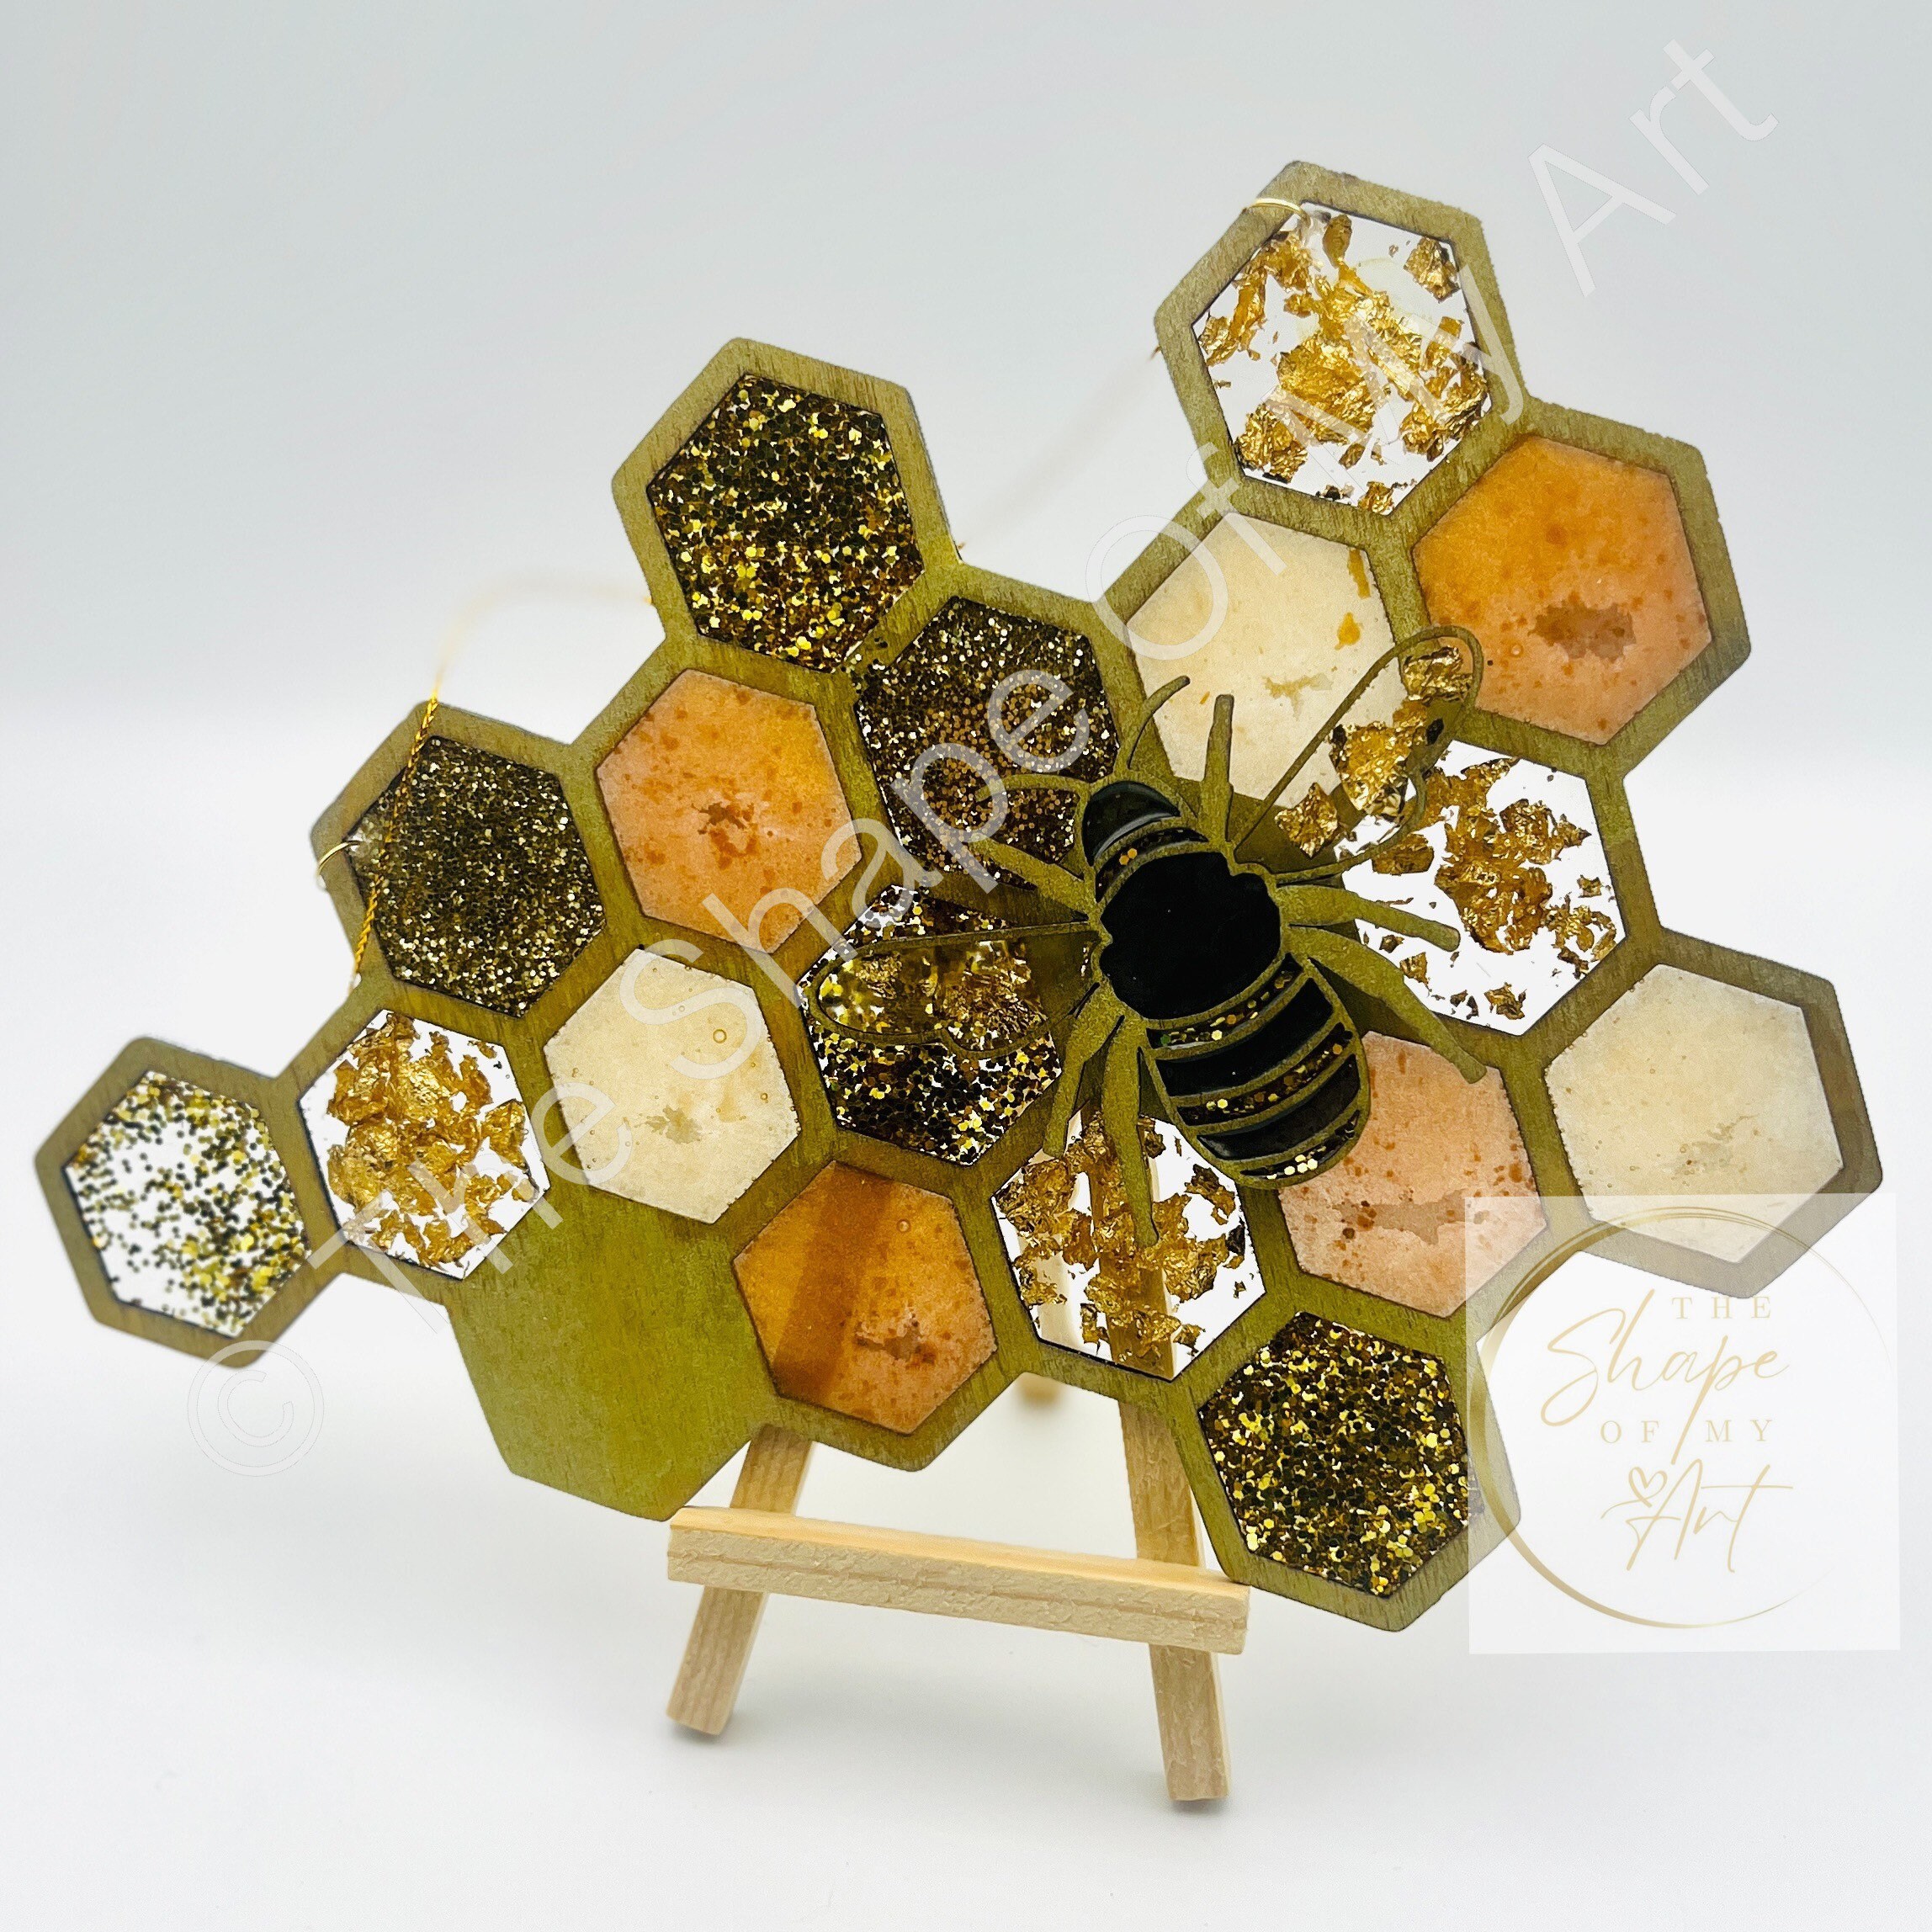 Honeycomb-Two Layer-Stained Wood Cutout-Bee Theme Wood Decor-3D